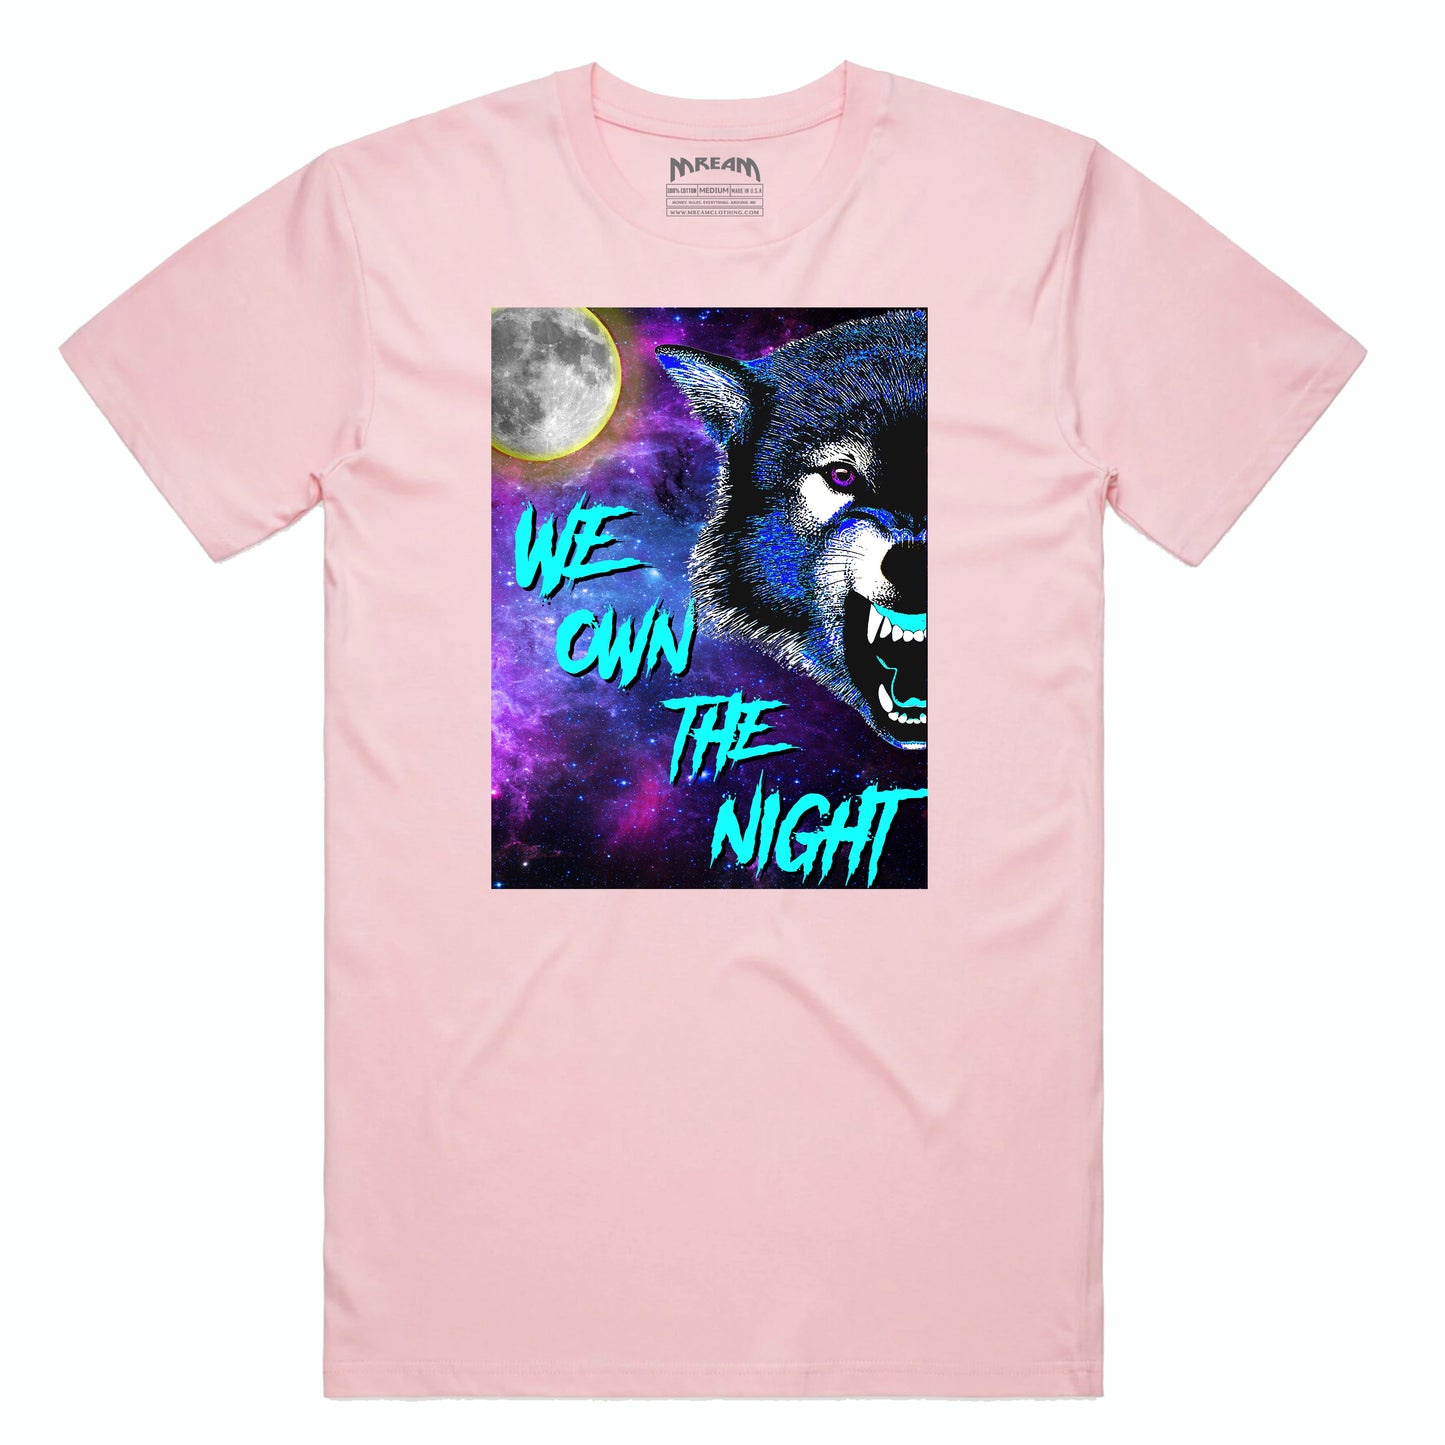 We Own The Night Tee (Pink) /D9